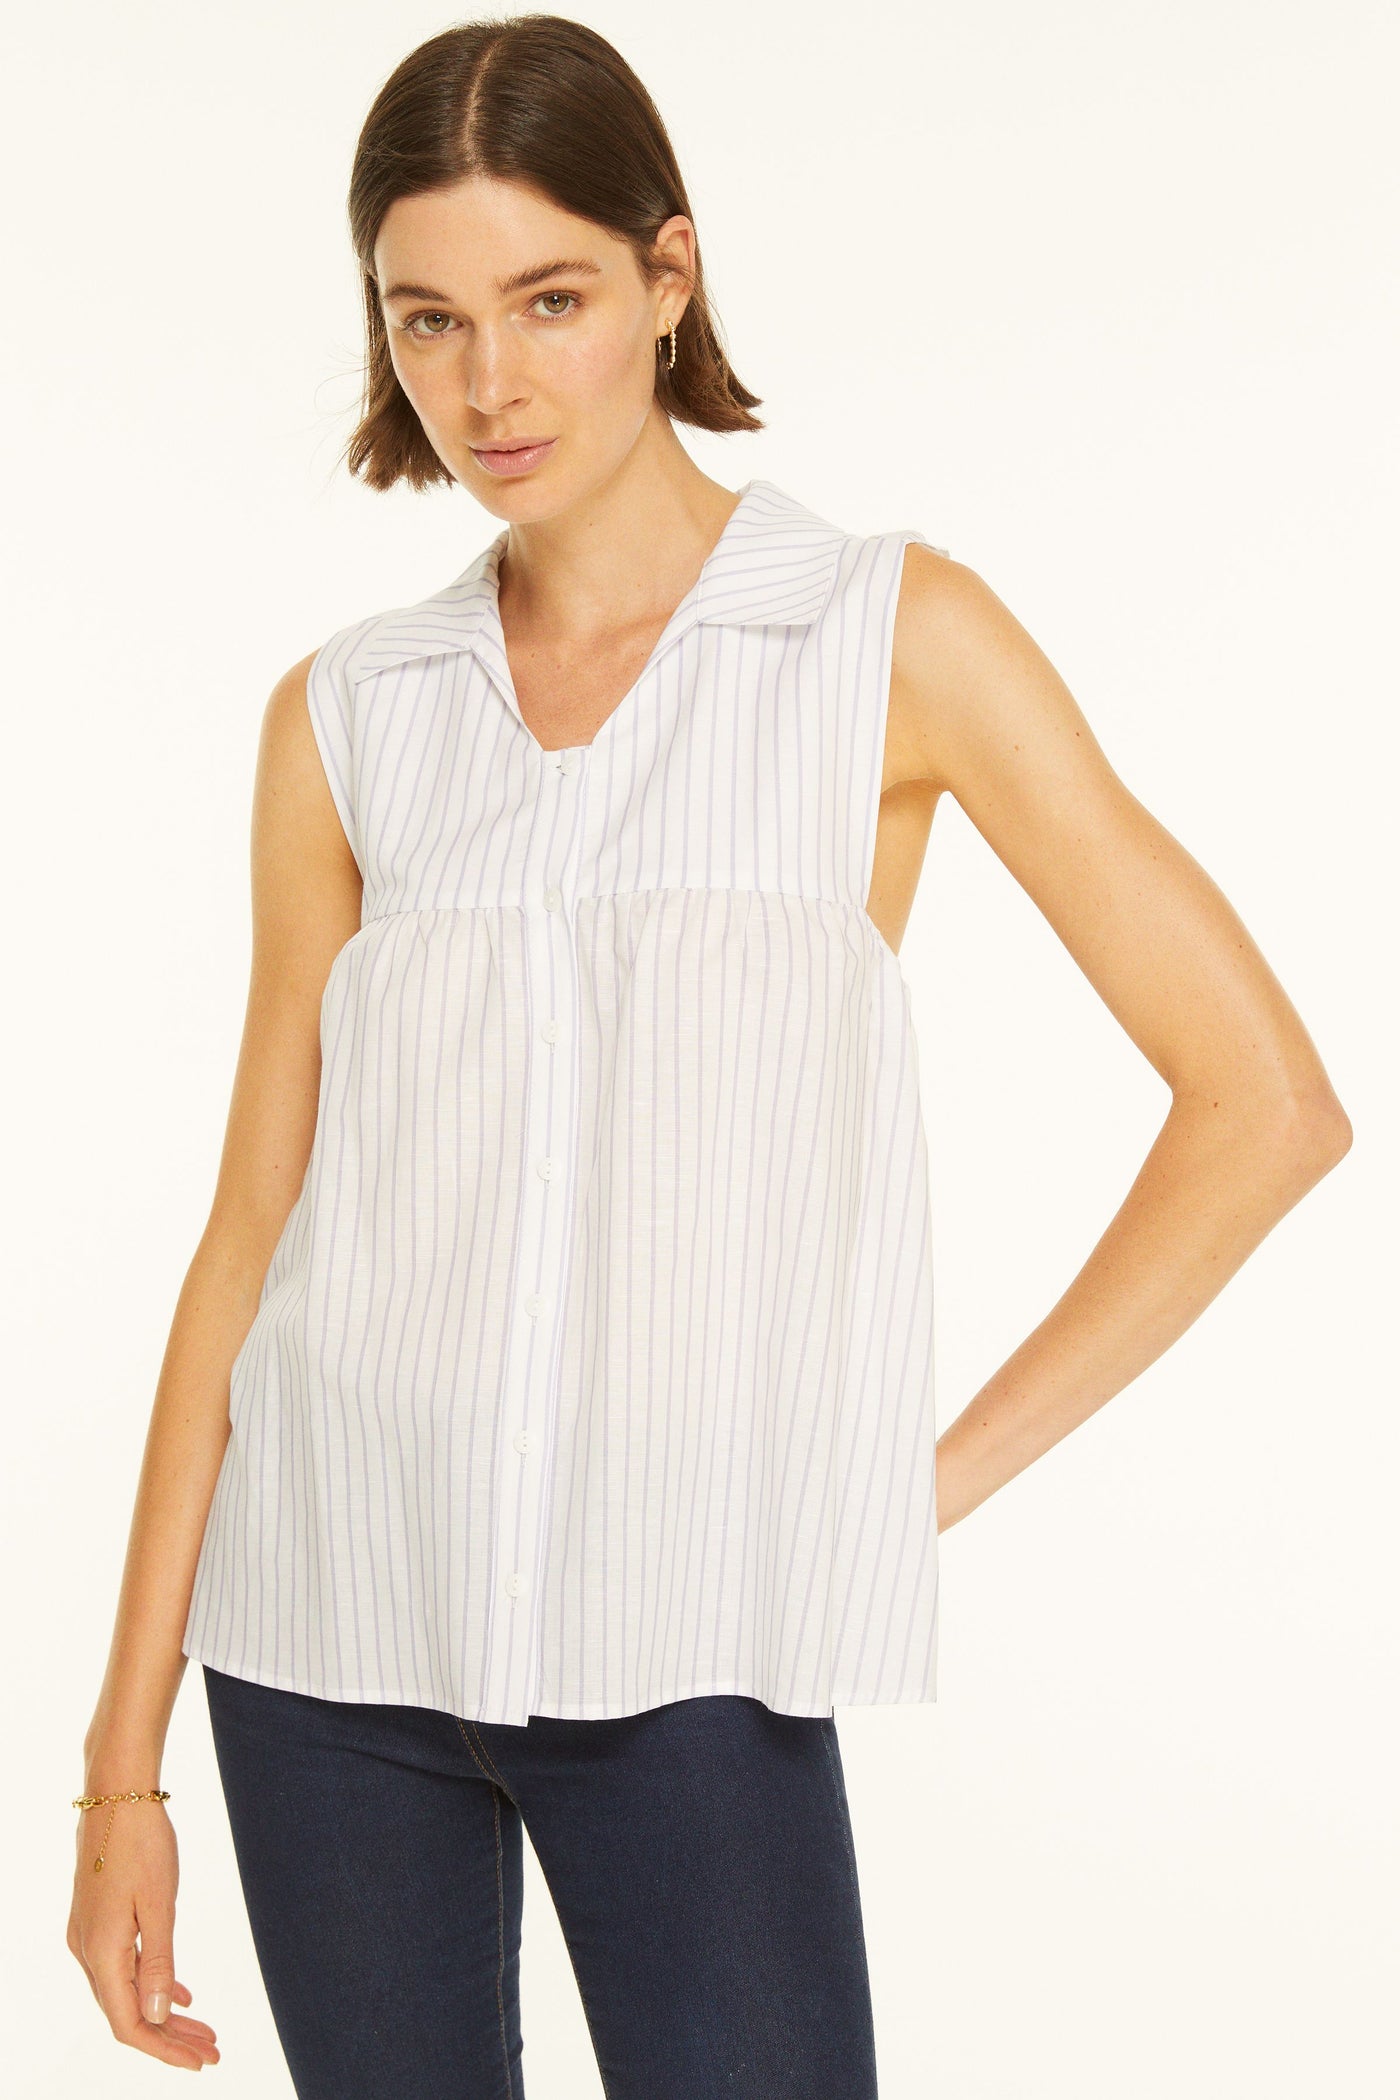 Romilly Shirt